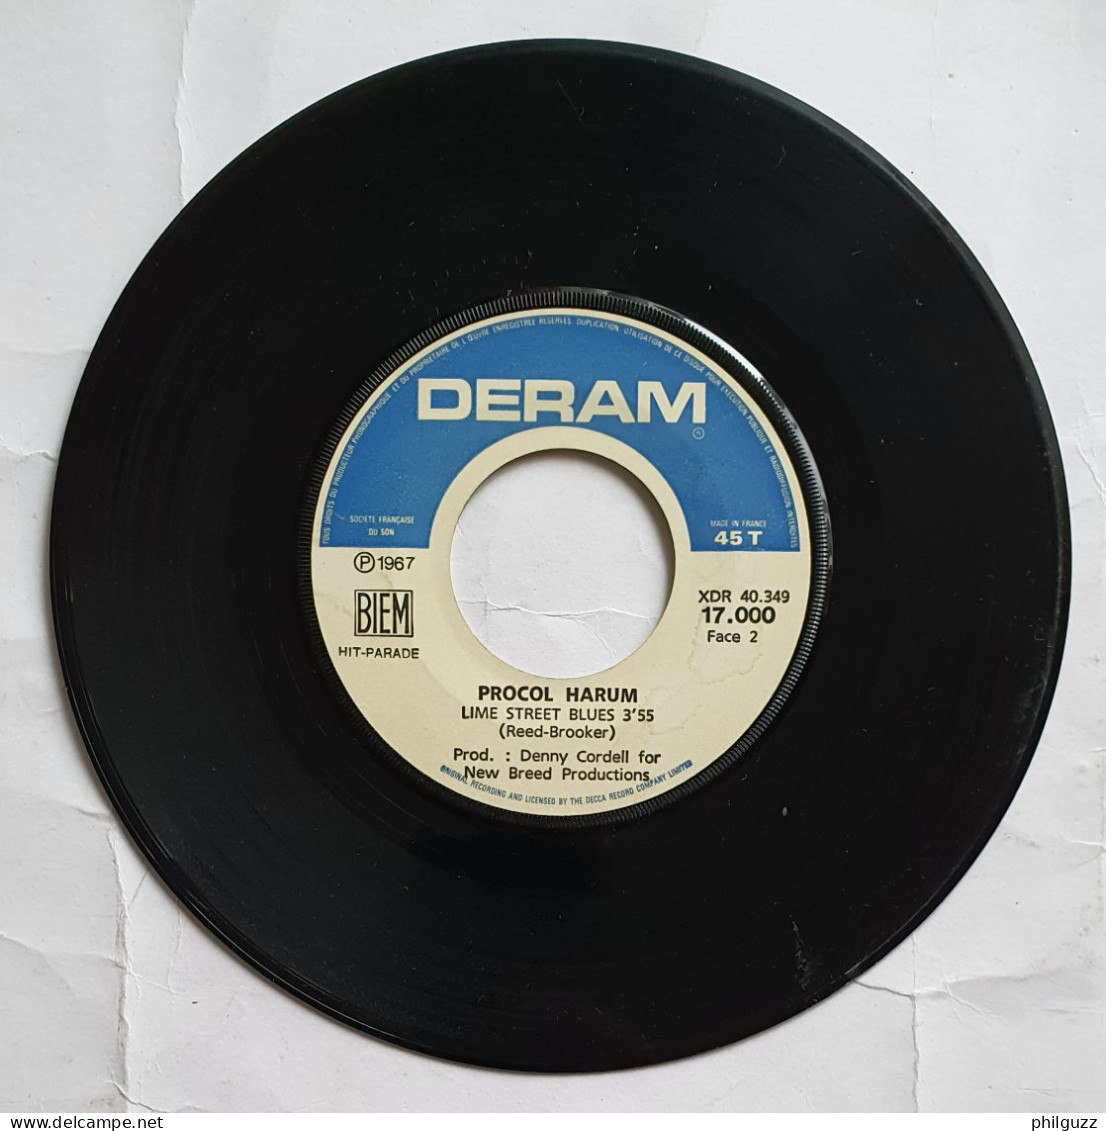 DISQUE 45 T PROCOL HARUM - A WHITER SHADE OF PALE 1967 - Rock